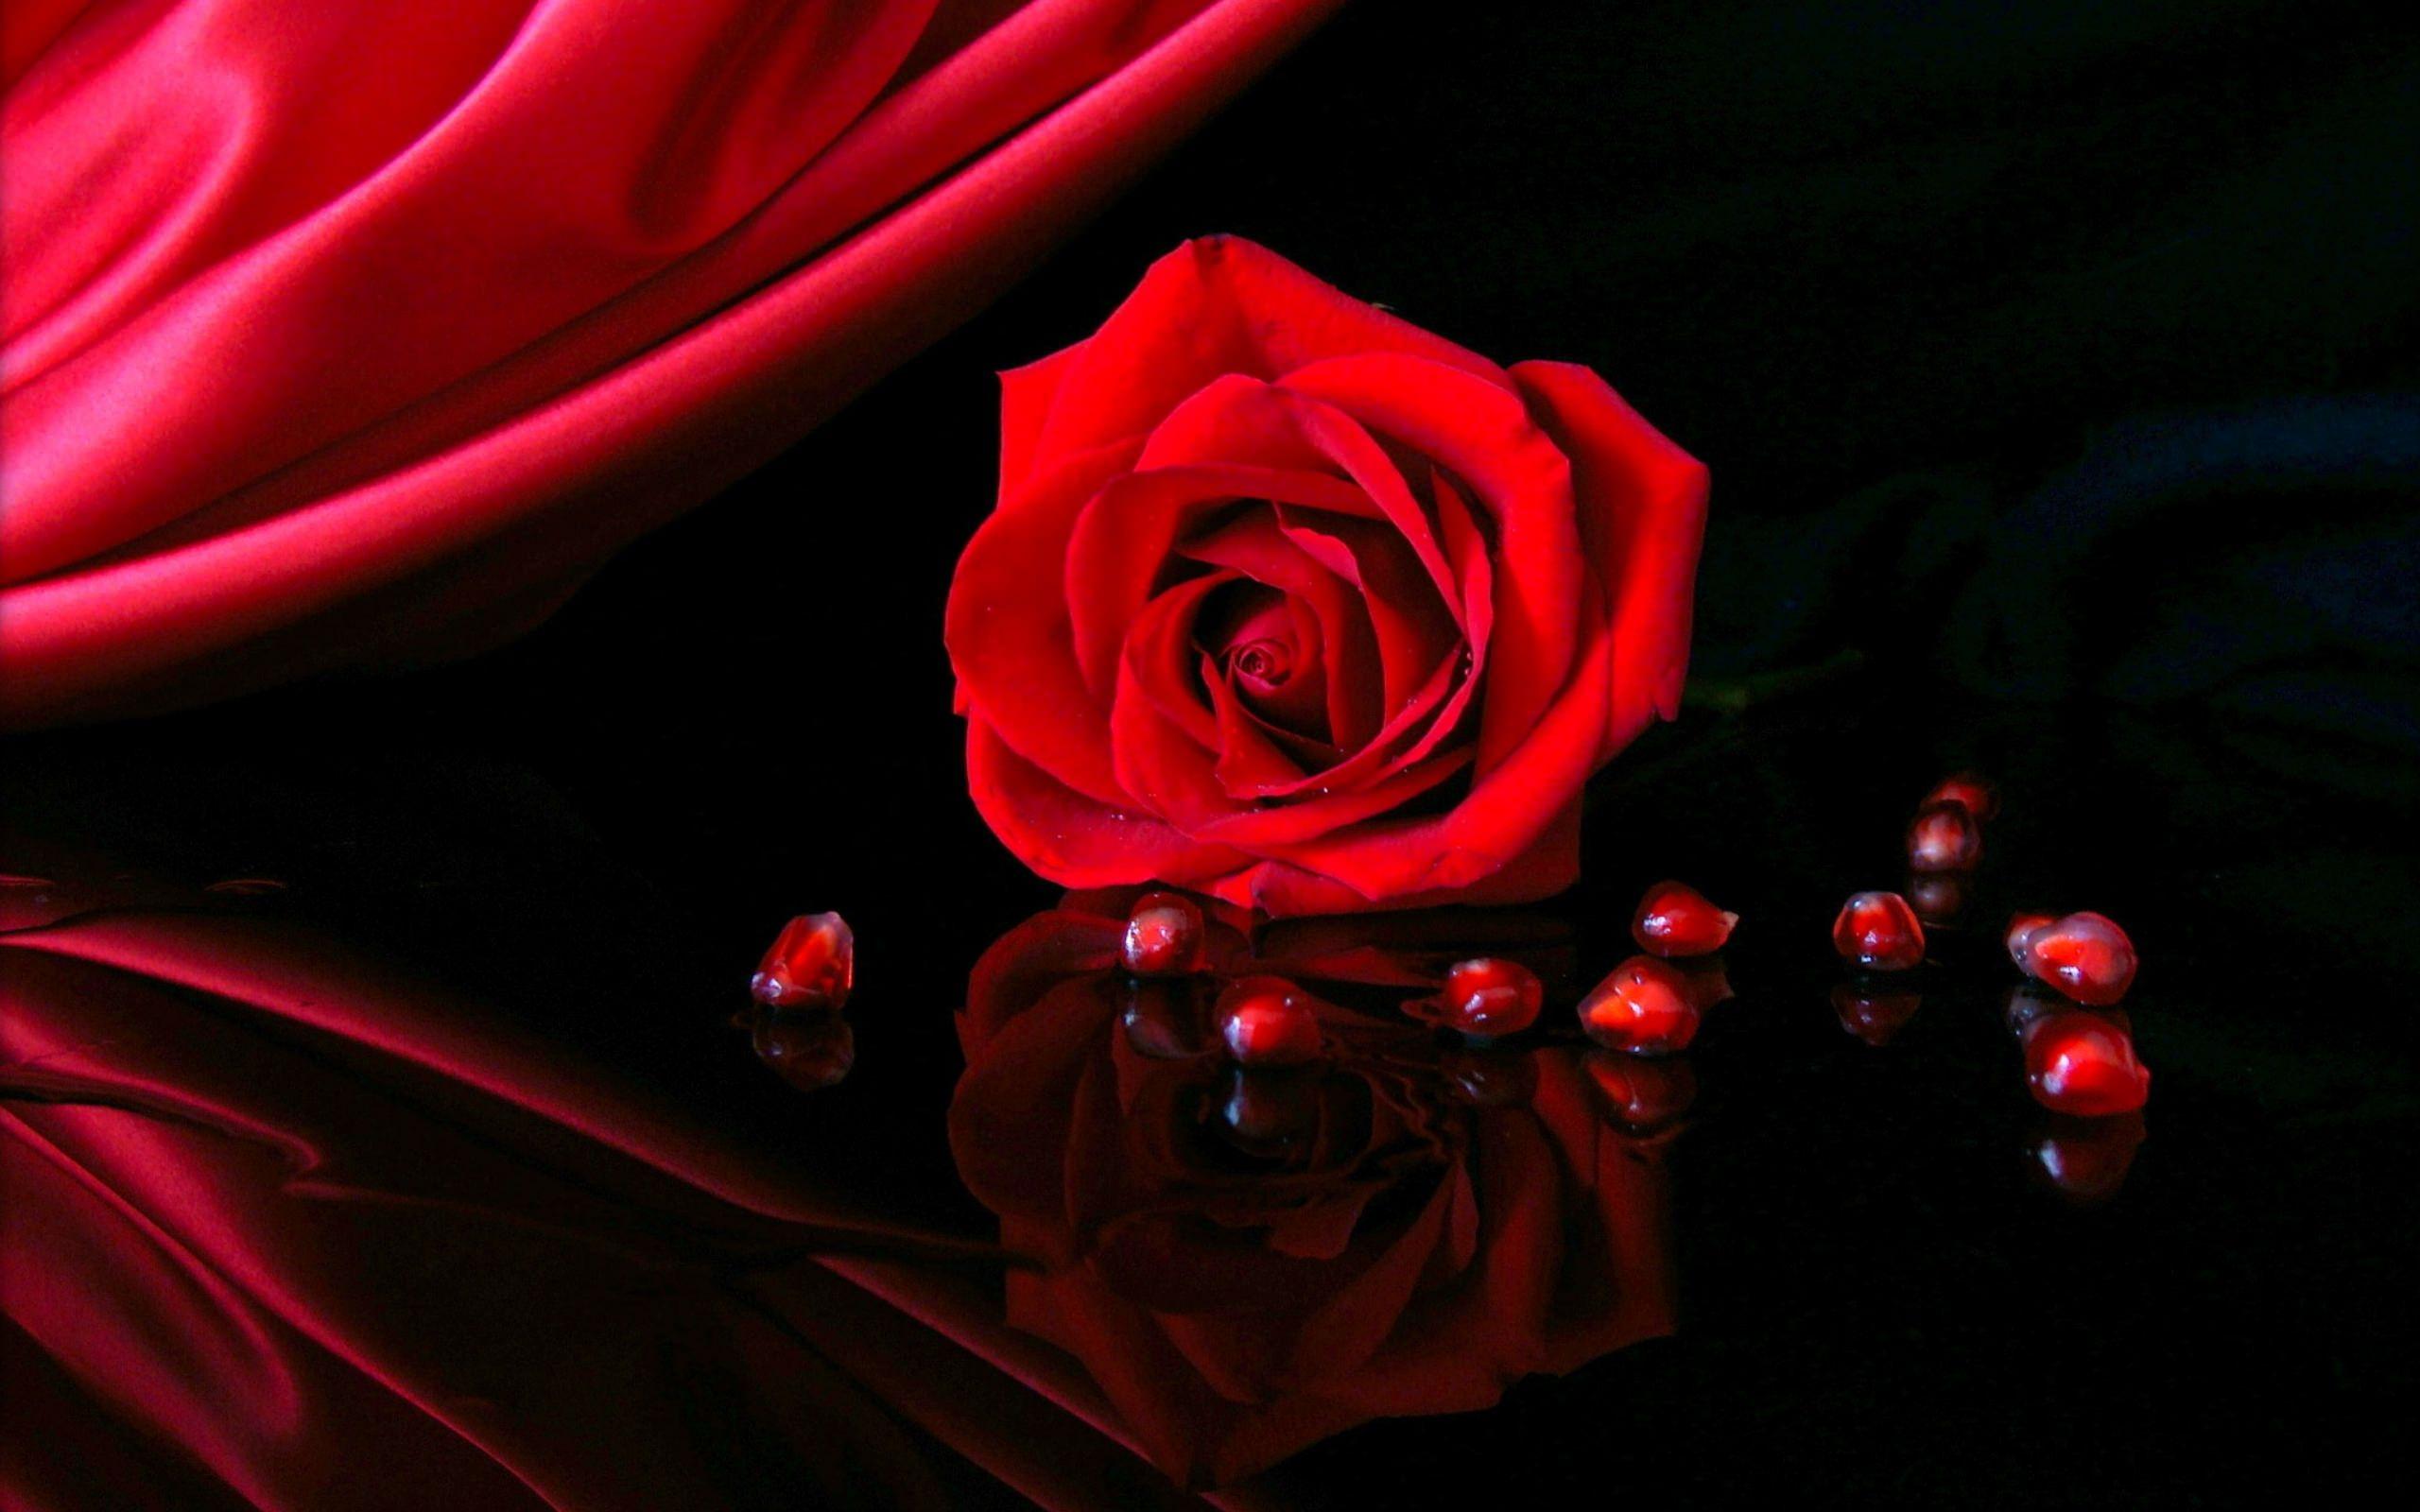 Roses Background, Wallpaper, Image, Picture. Design